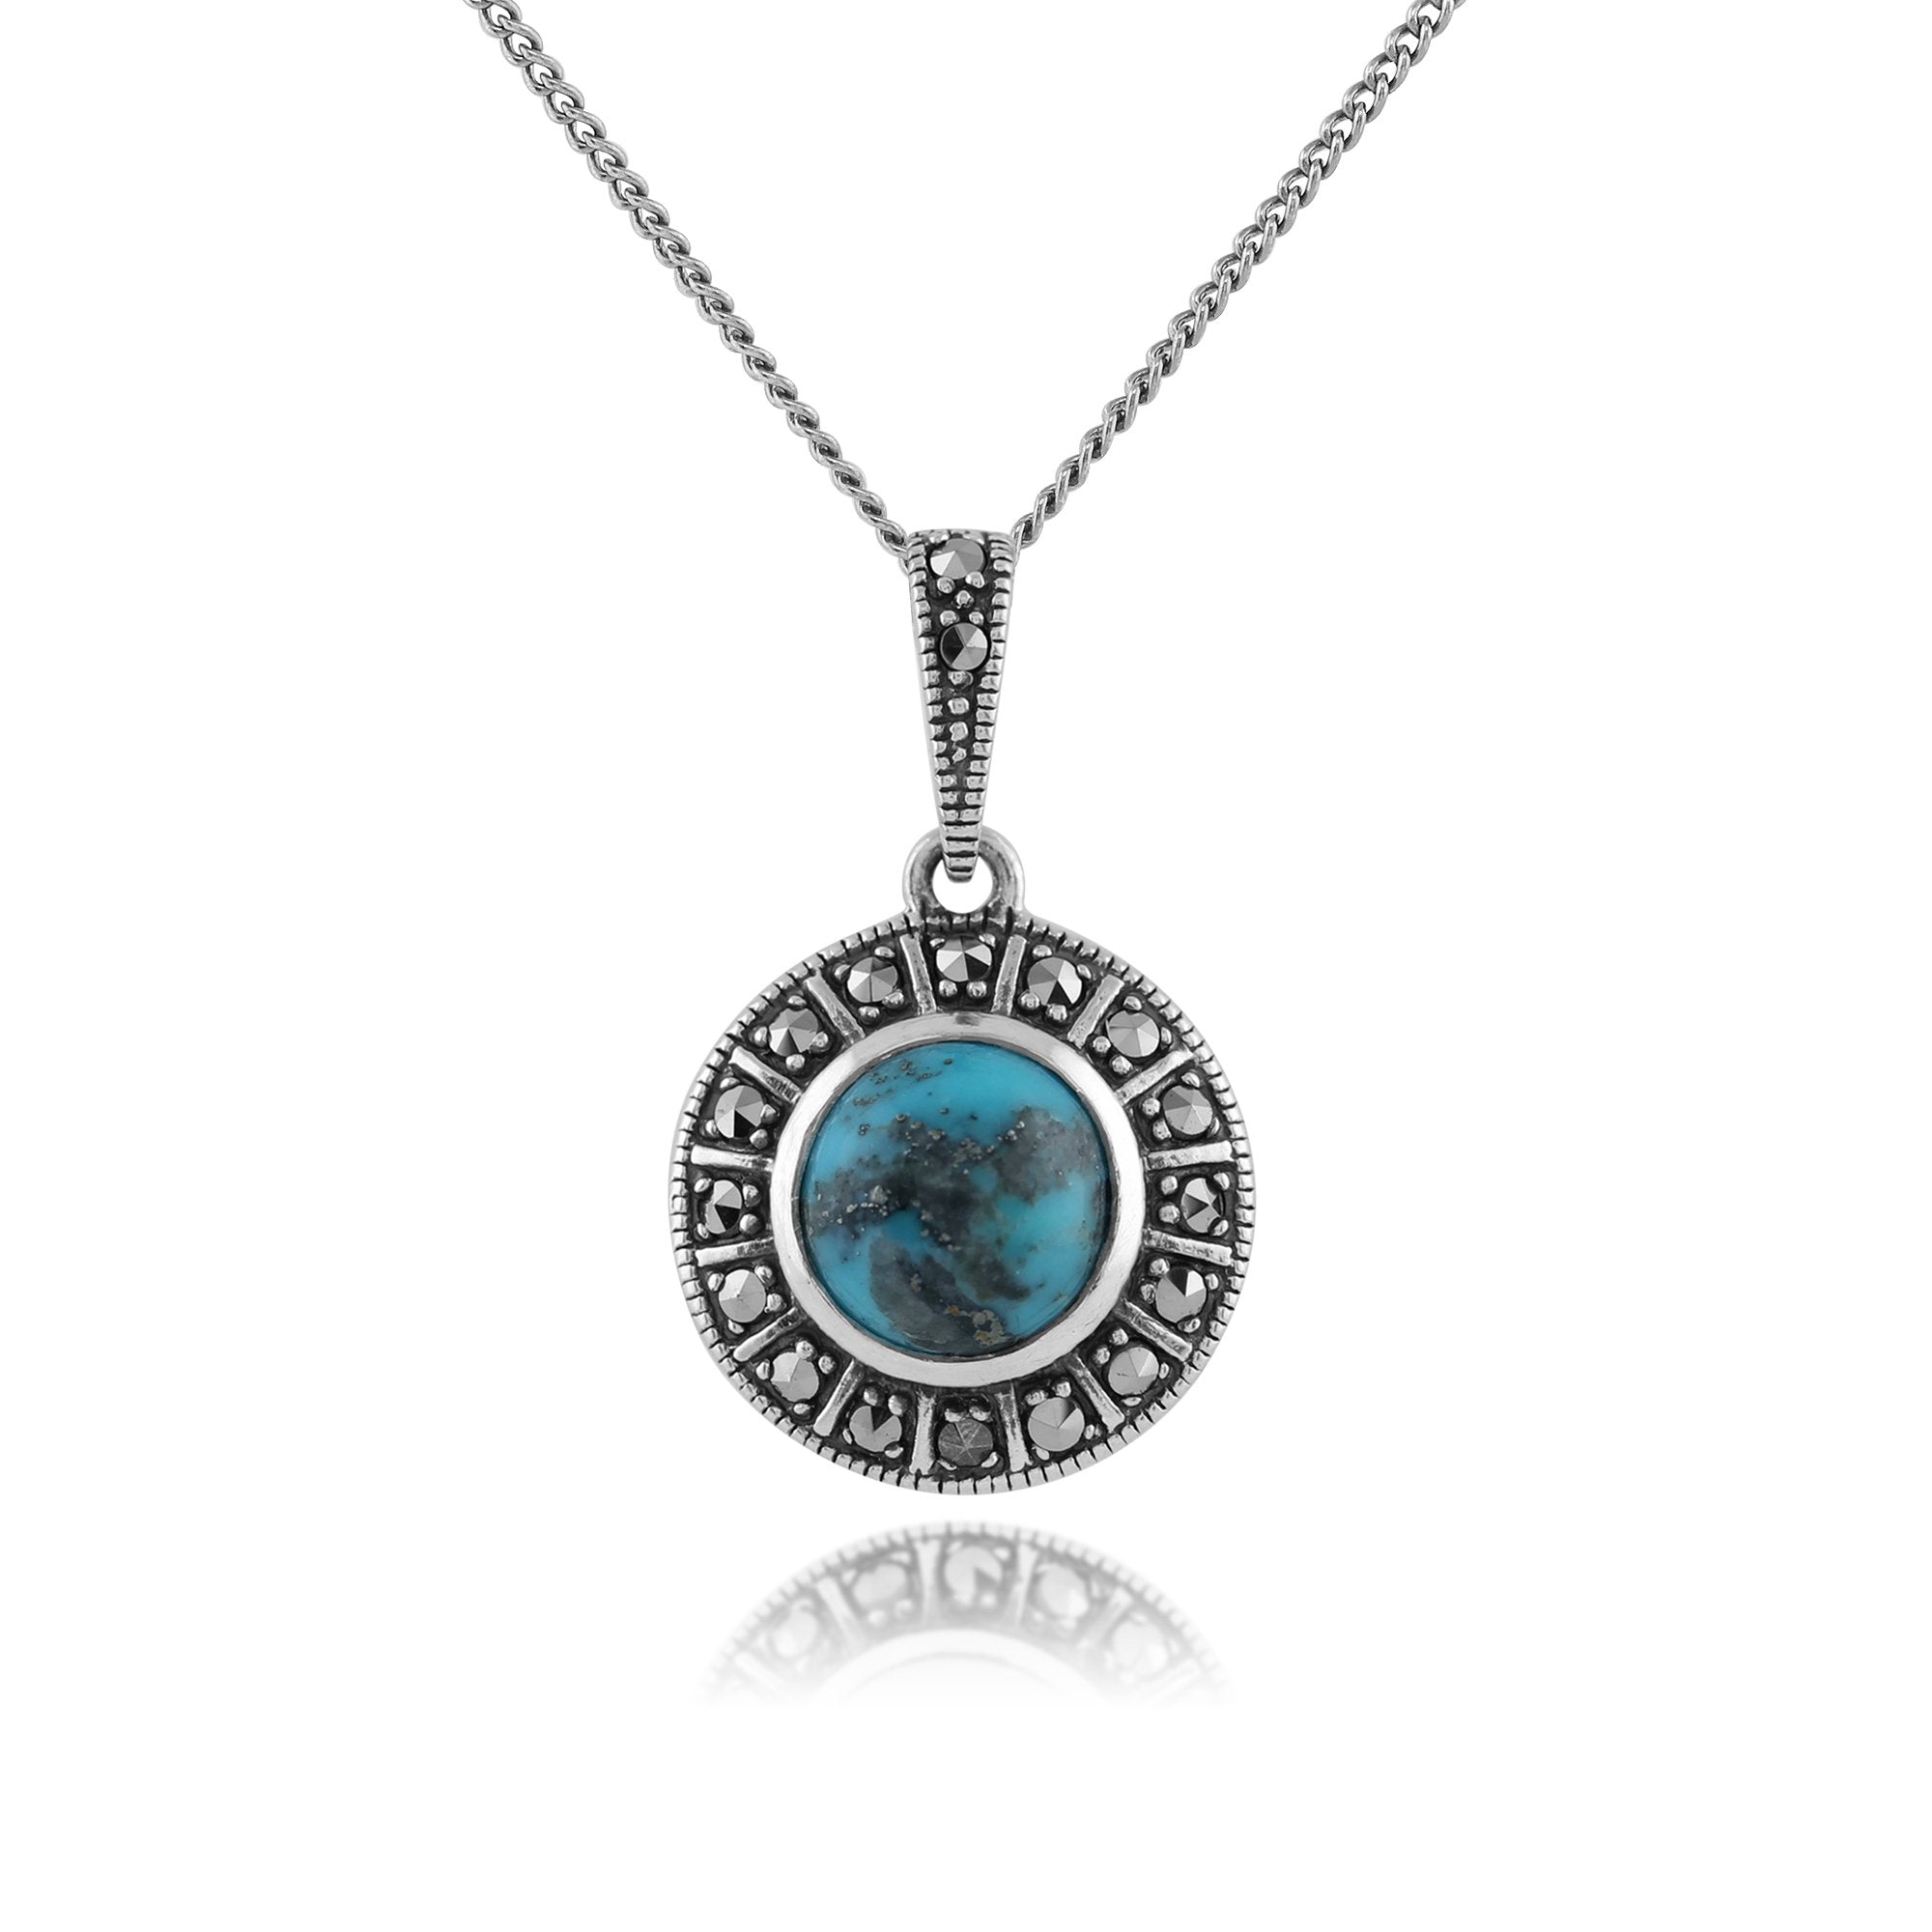 Art Deco Style Round Turquoise Cabochon & Marcasite Pendant in 925 Sterling Silver